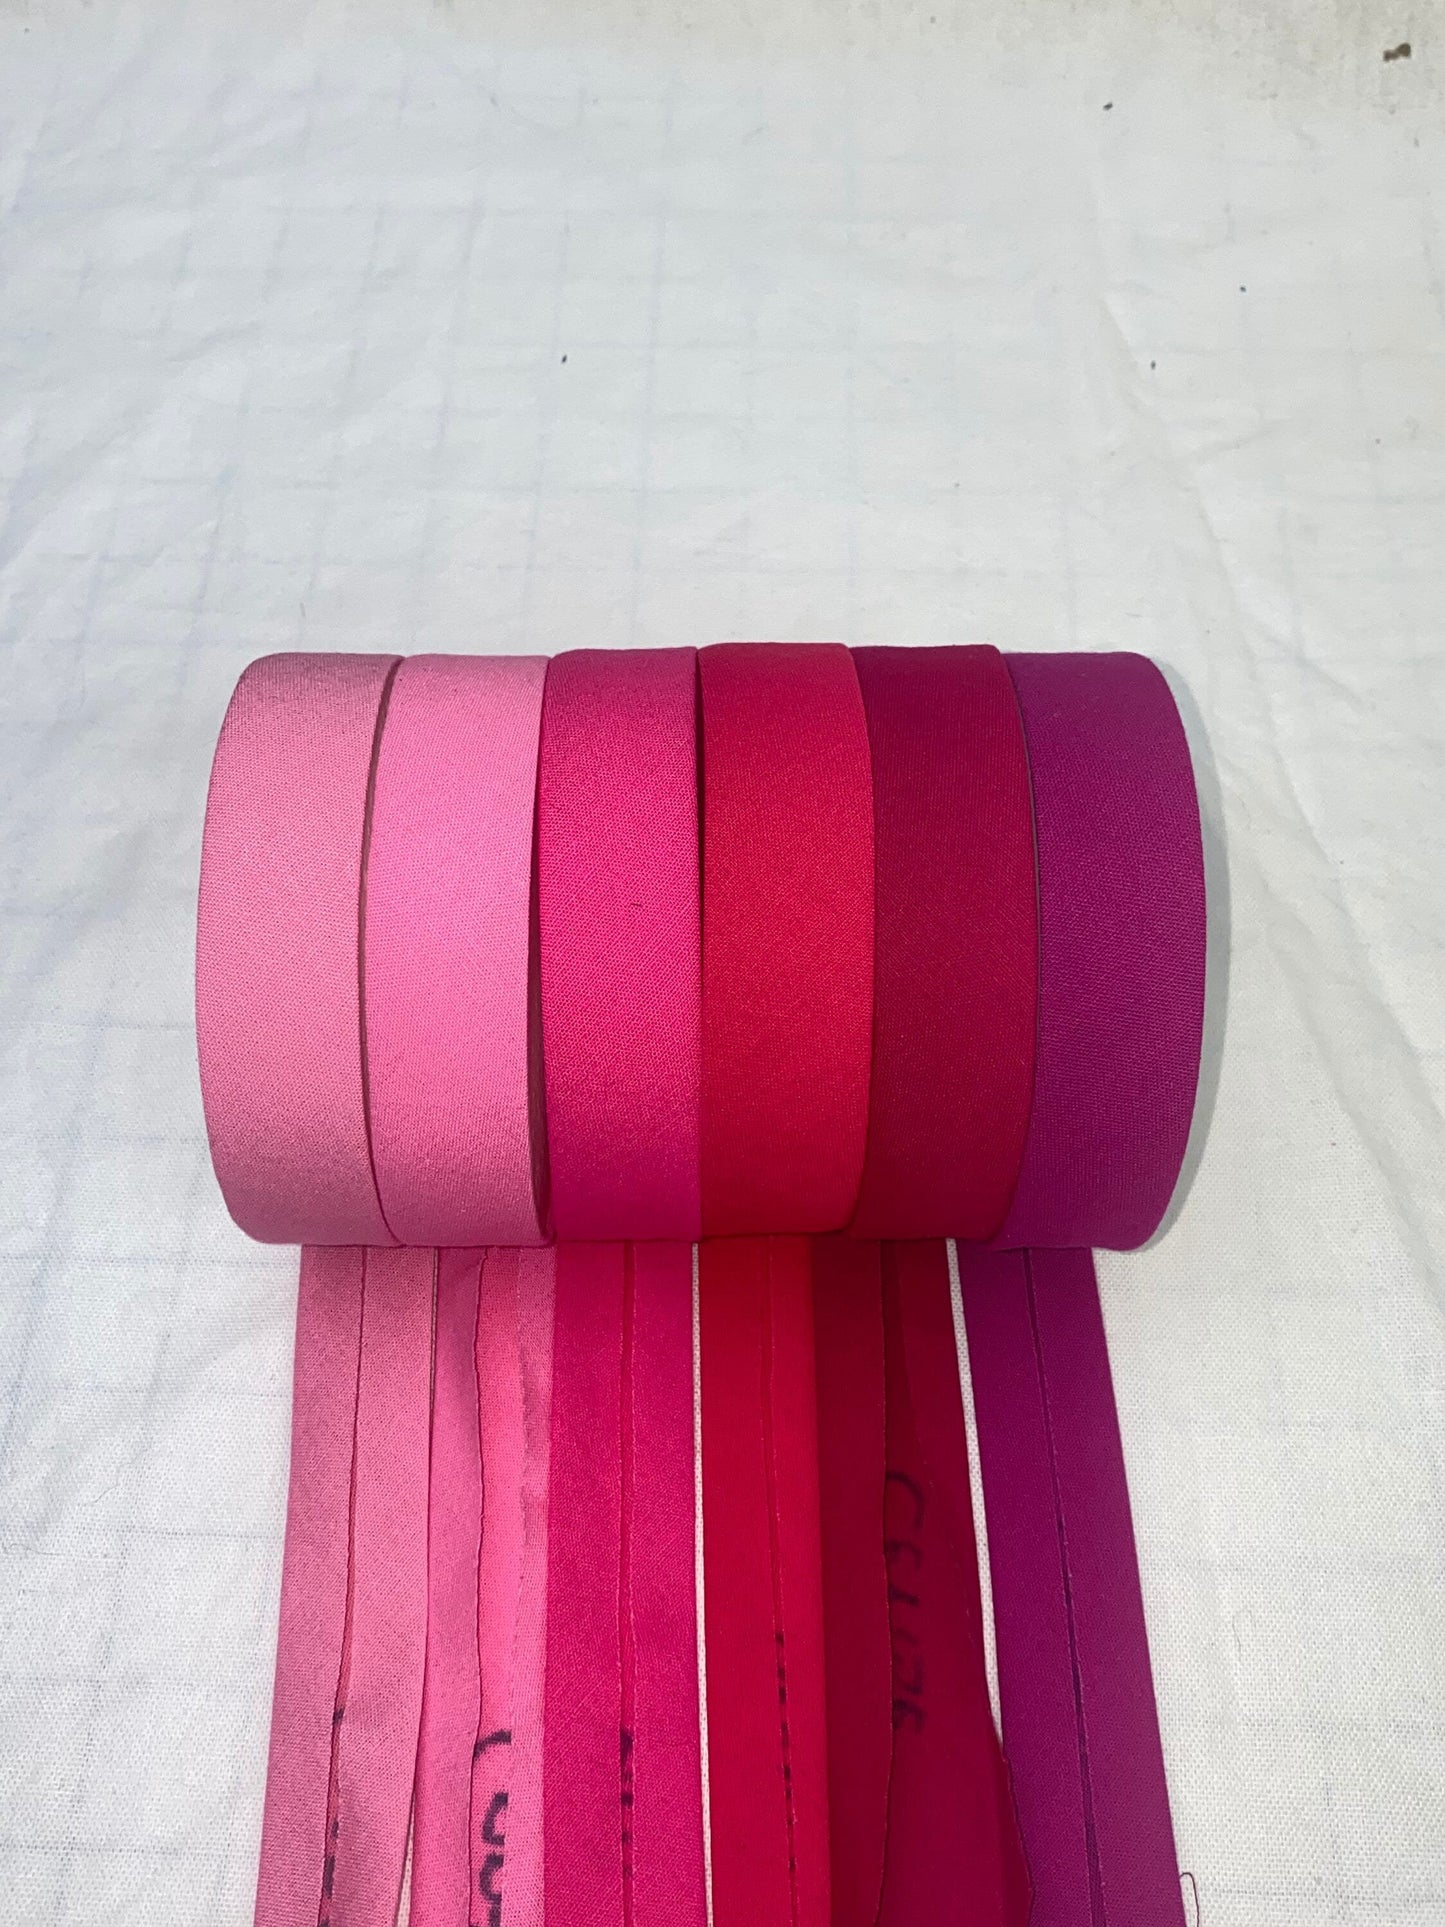 Bias Binding (tape) 25mm or 12mm, single fold, 100% Cotton. pink, lipstick, candy, hot pink cerise. Fusible iron on available.